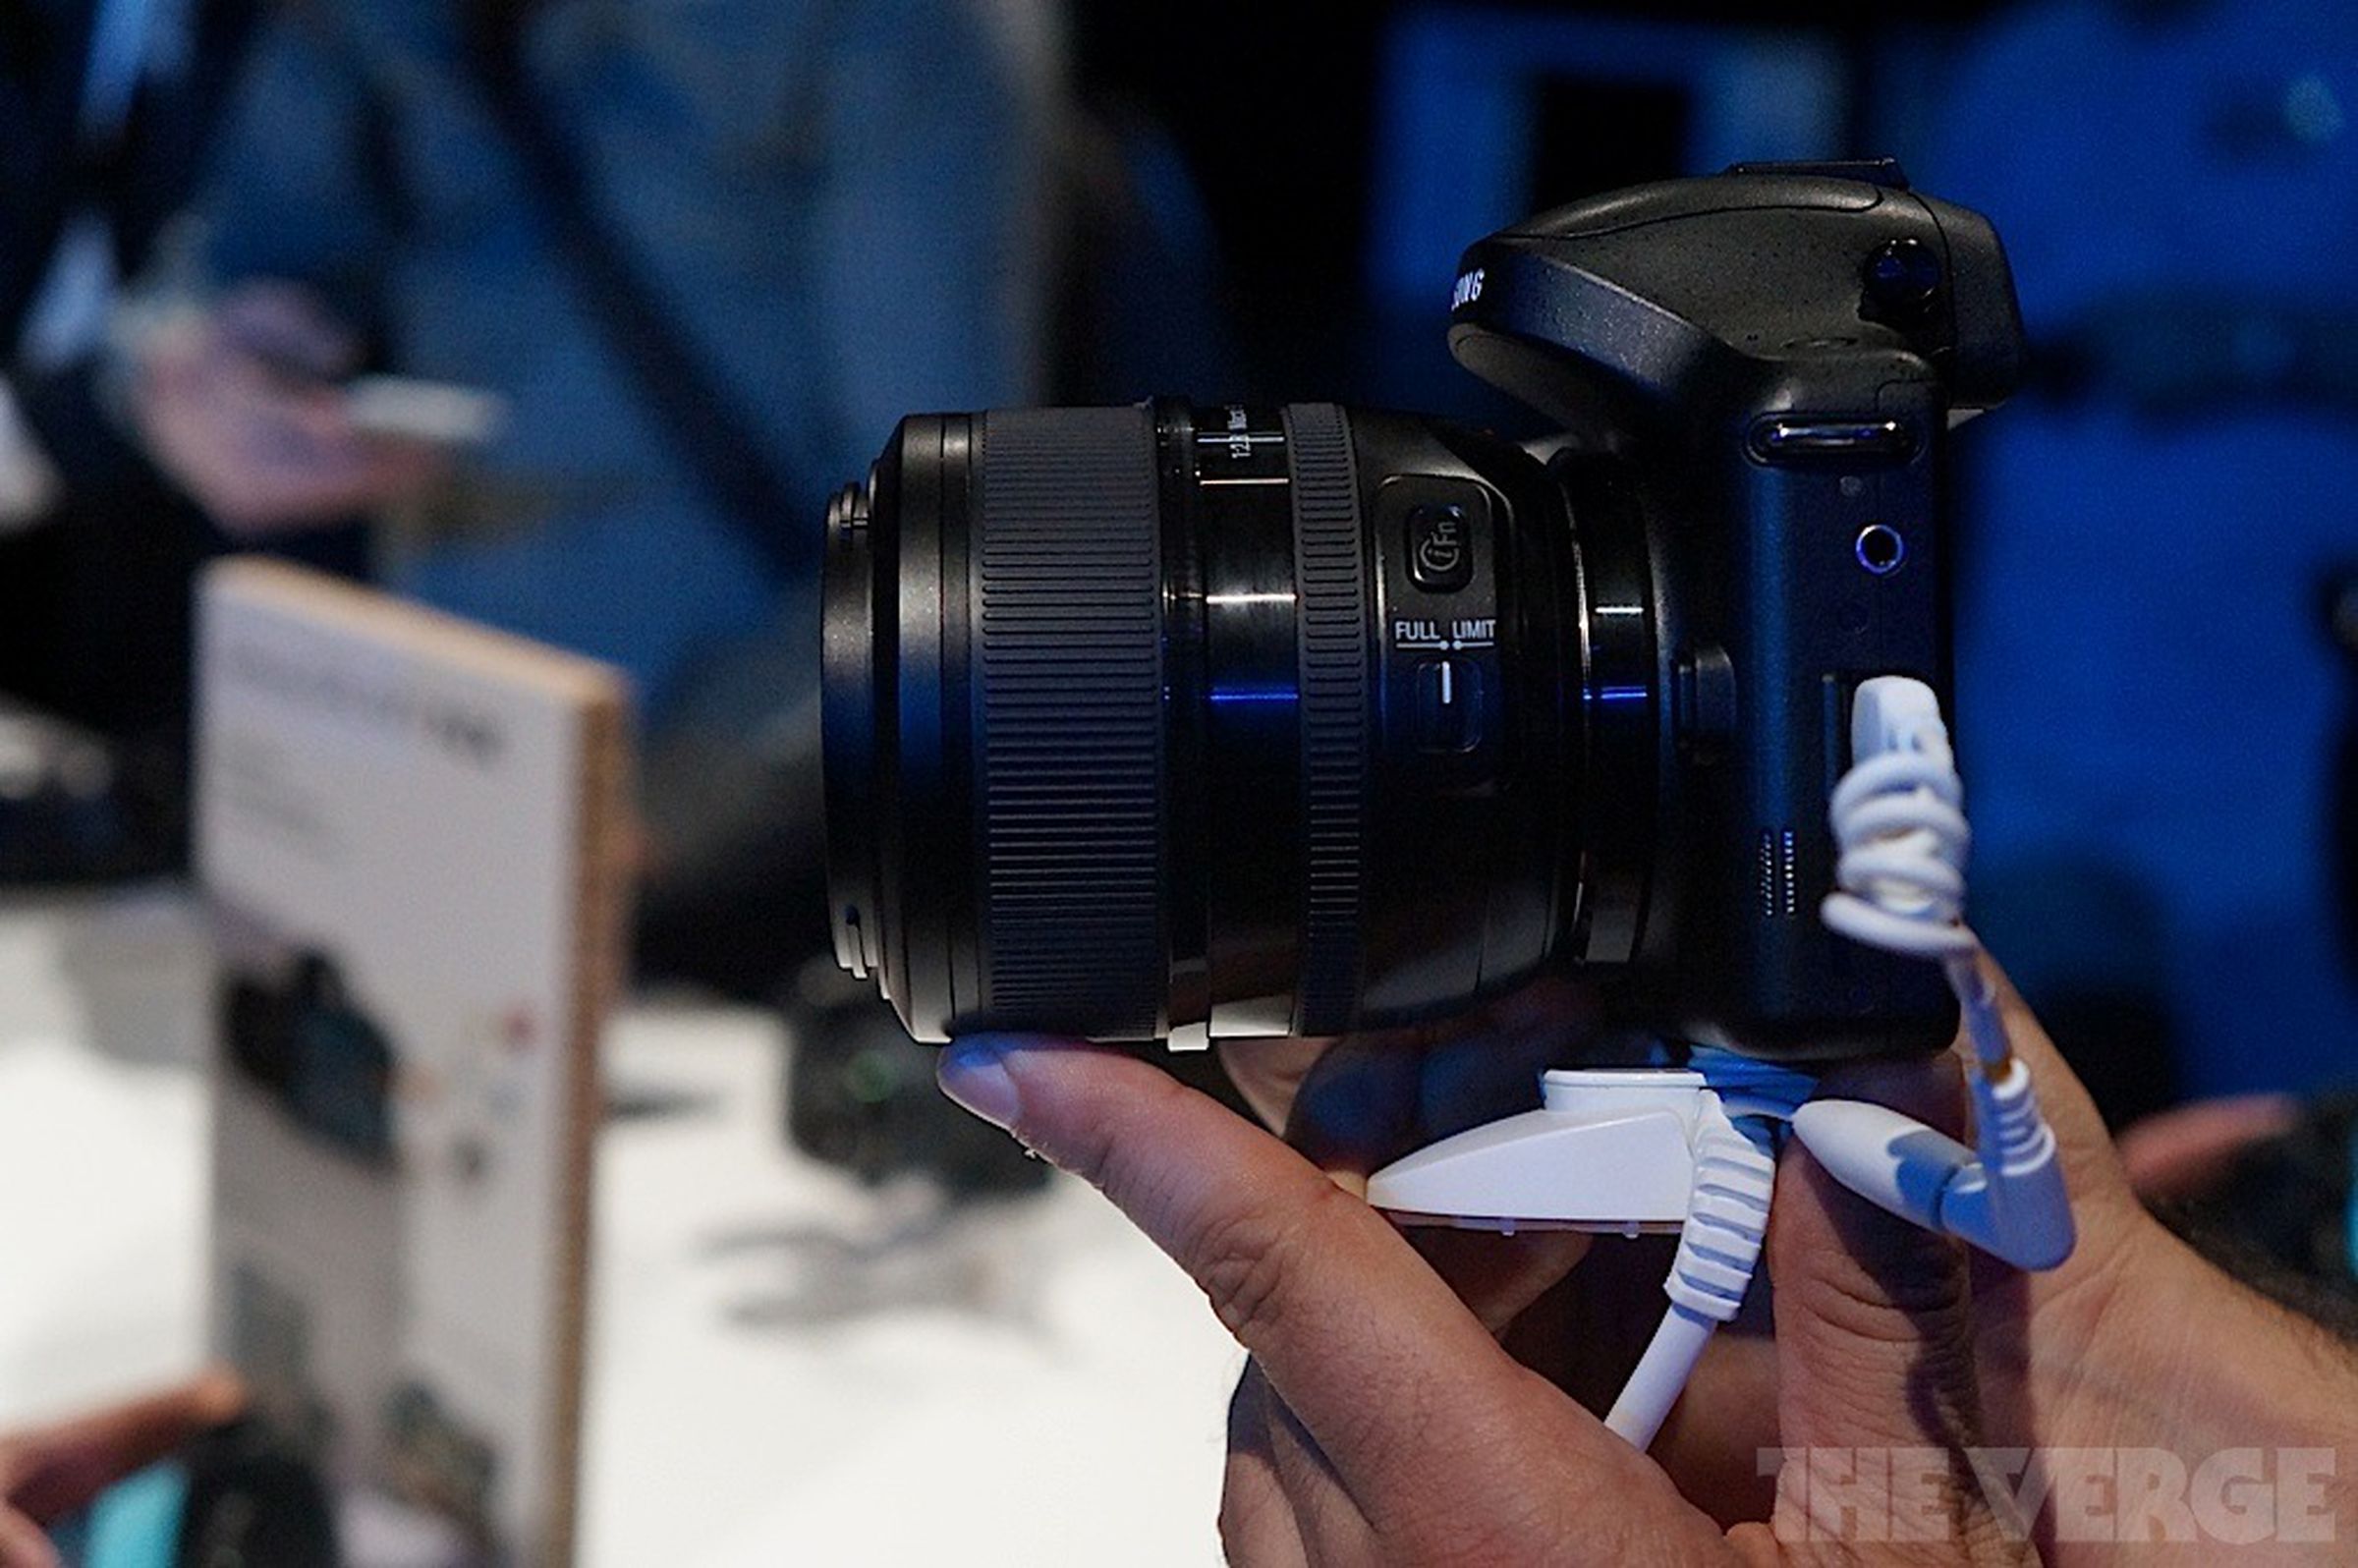 Samsung Galaxy NX hands-on pictures